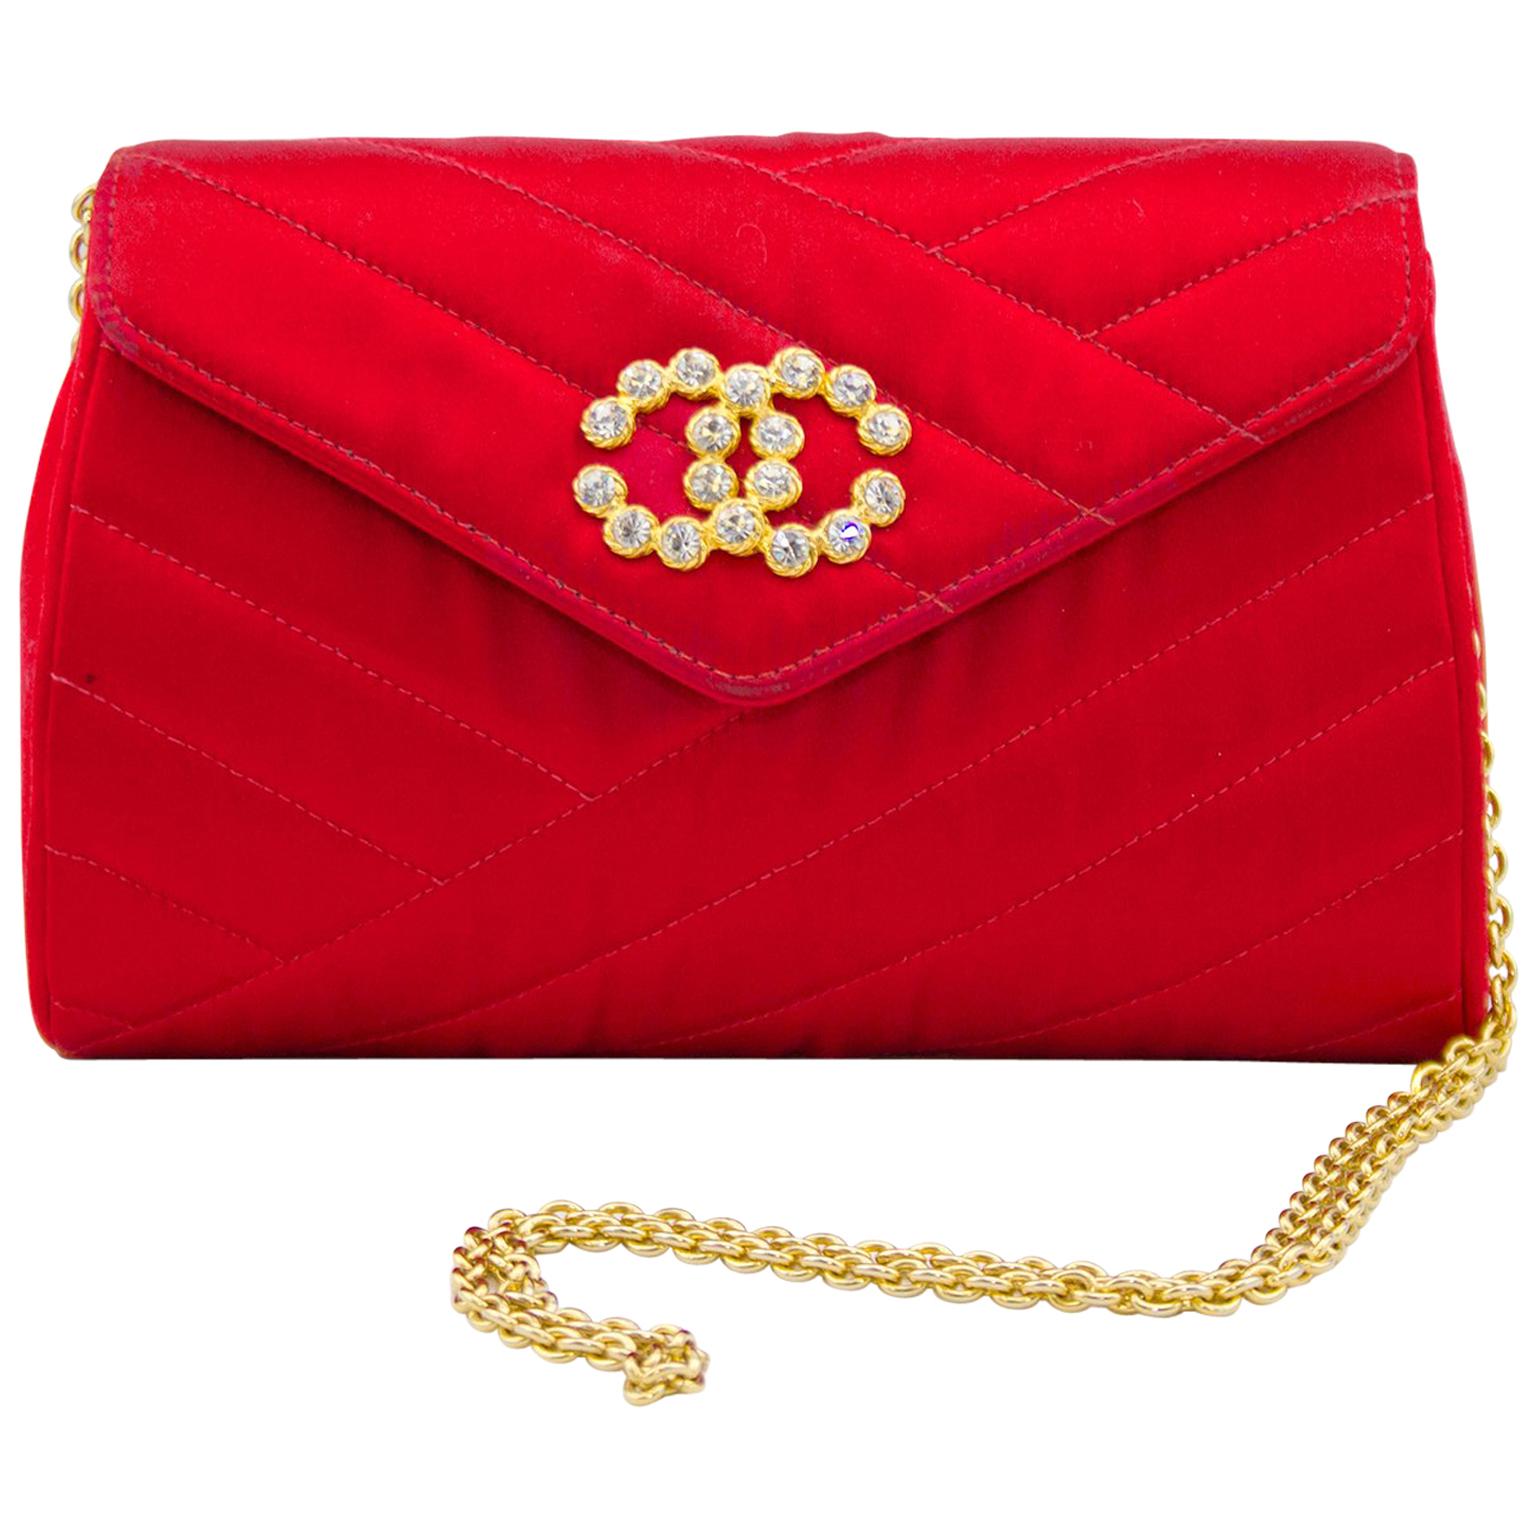 1980s Chanel Red Satin Evening Bag